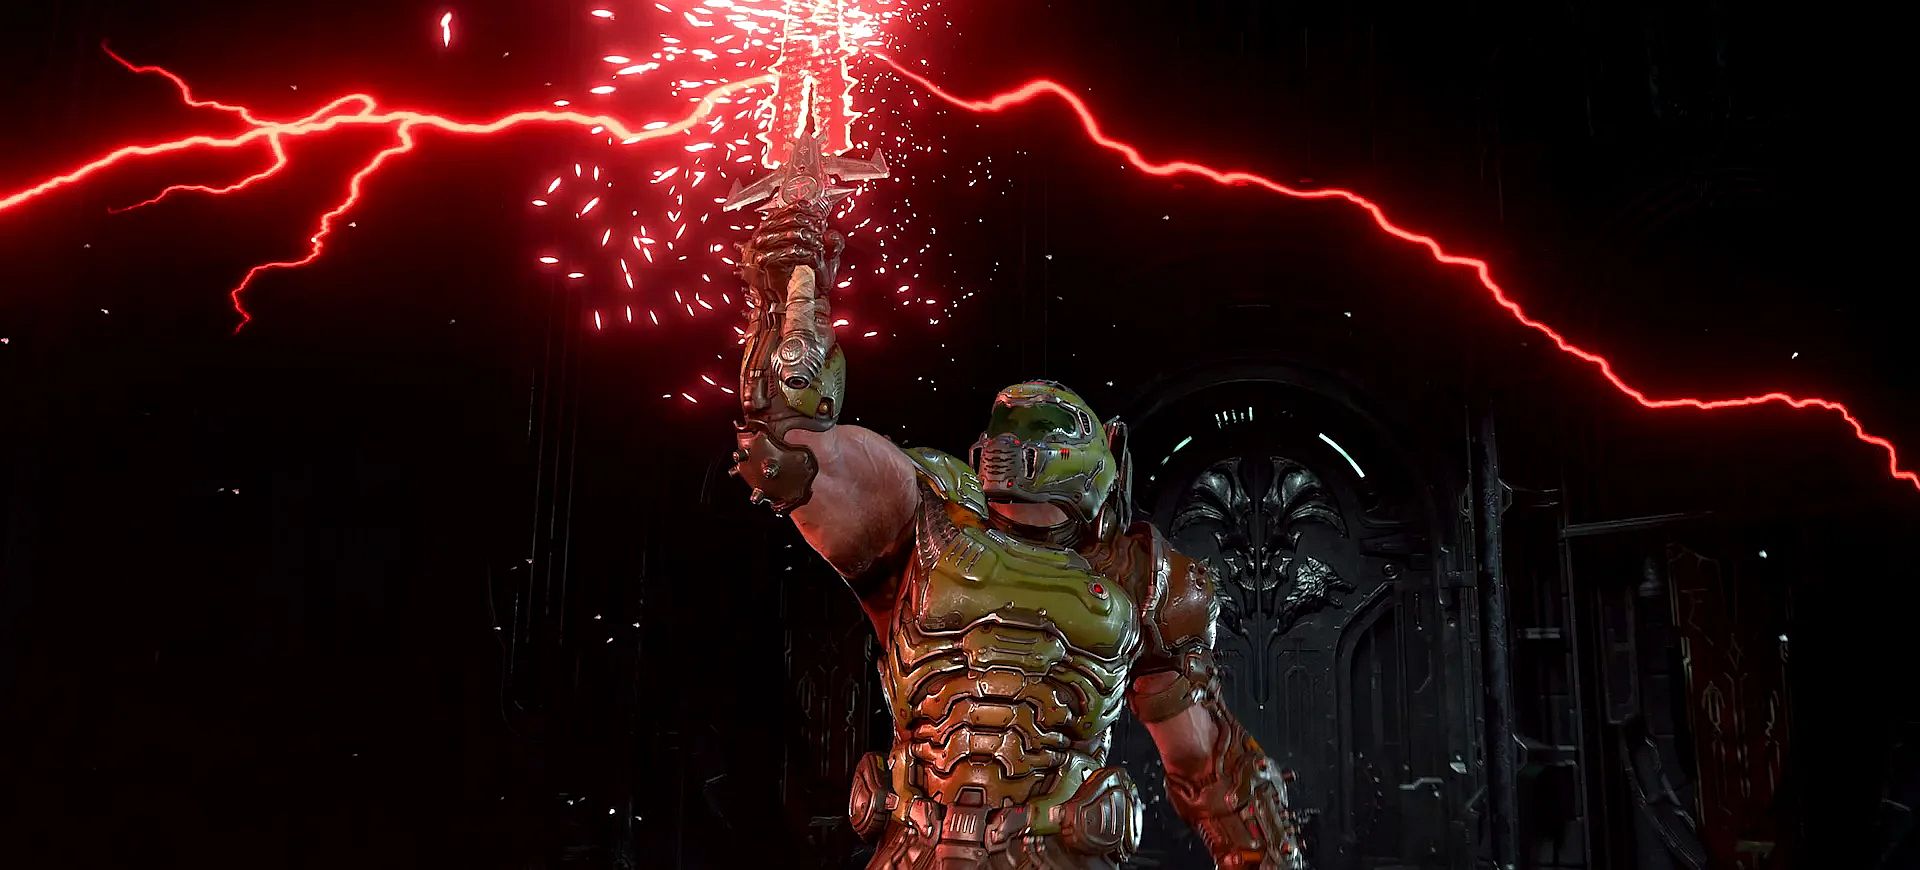 Image for Doom Eternal has raked in over $450 million since launch